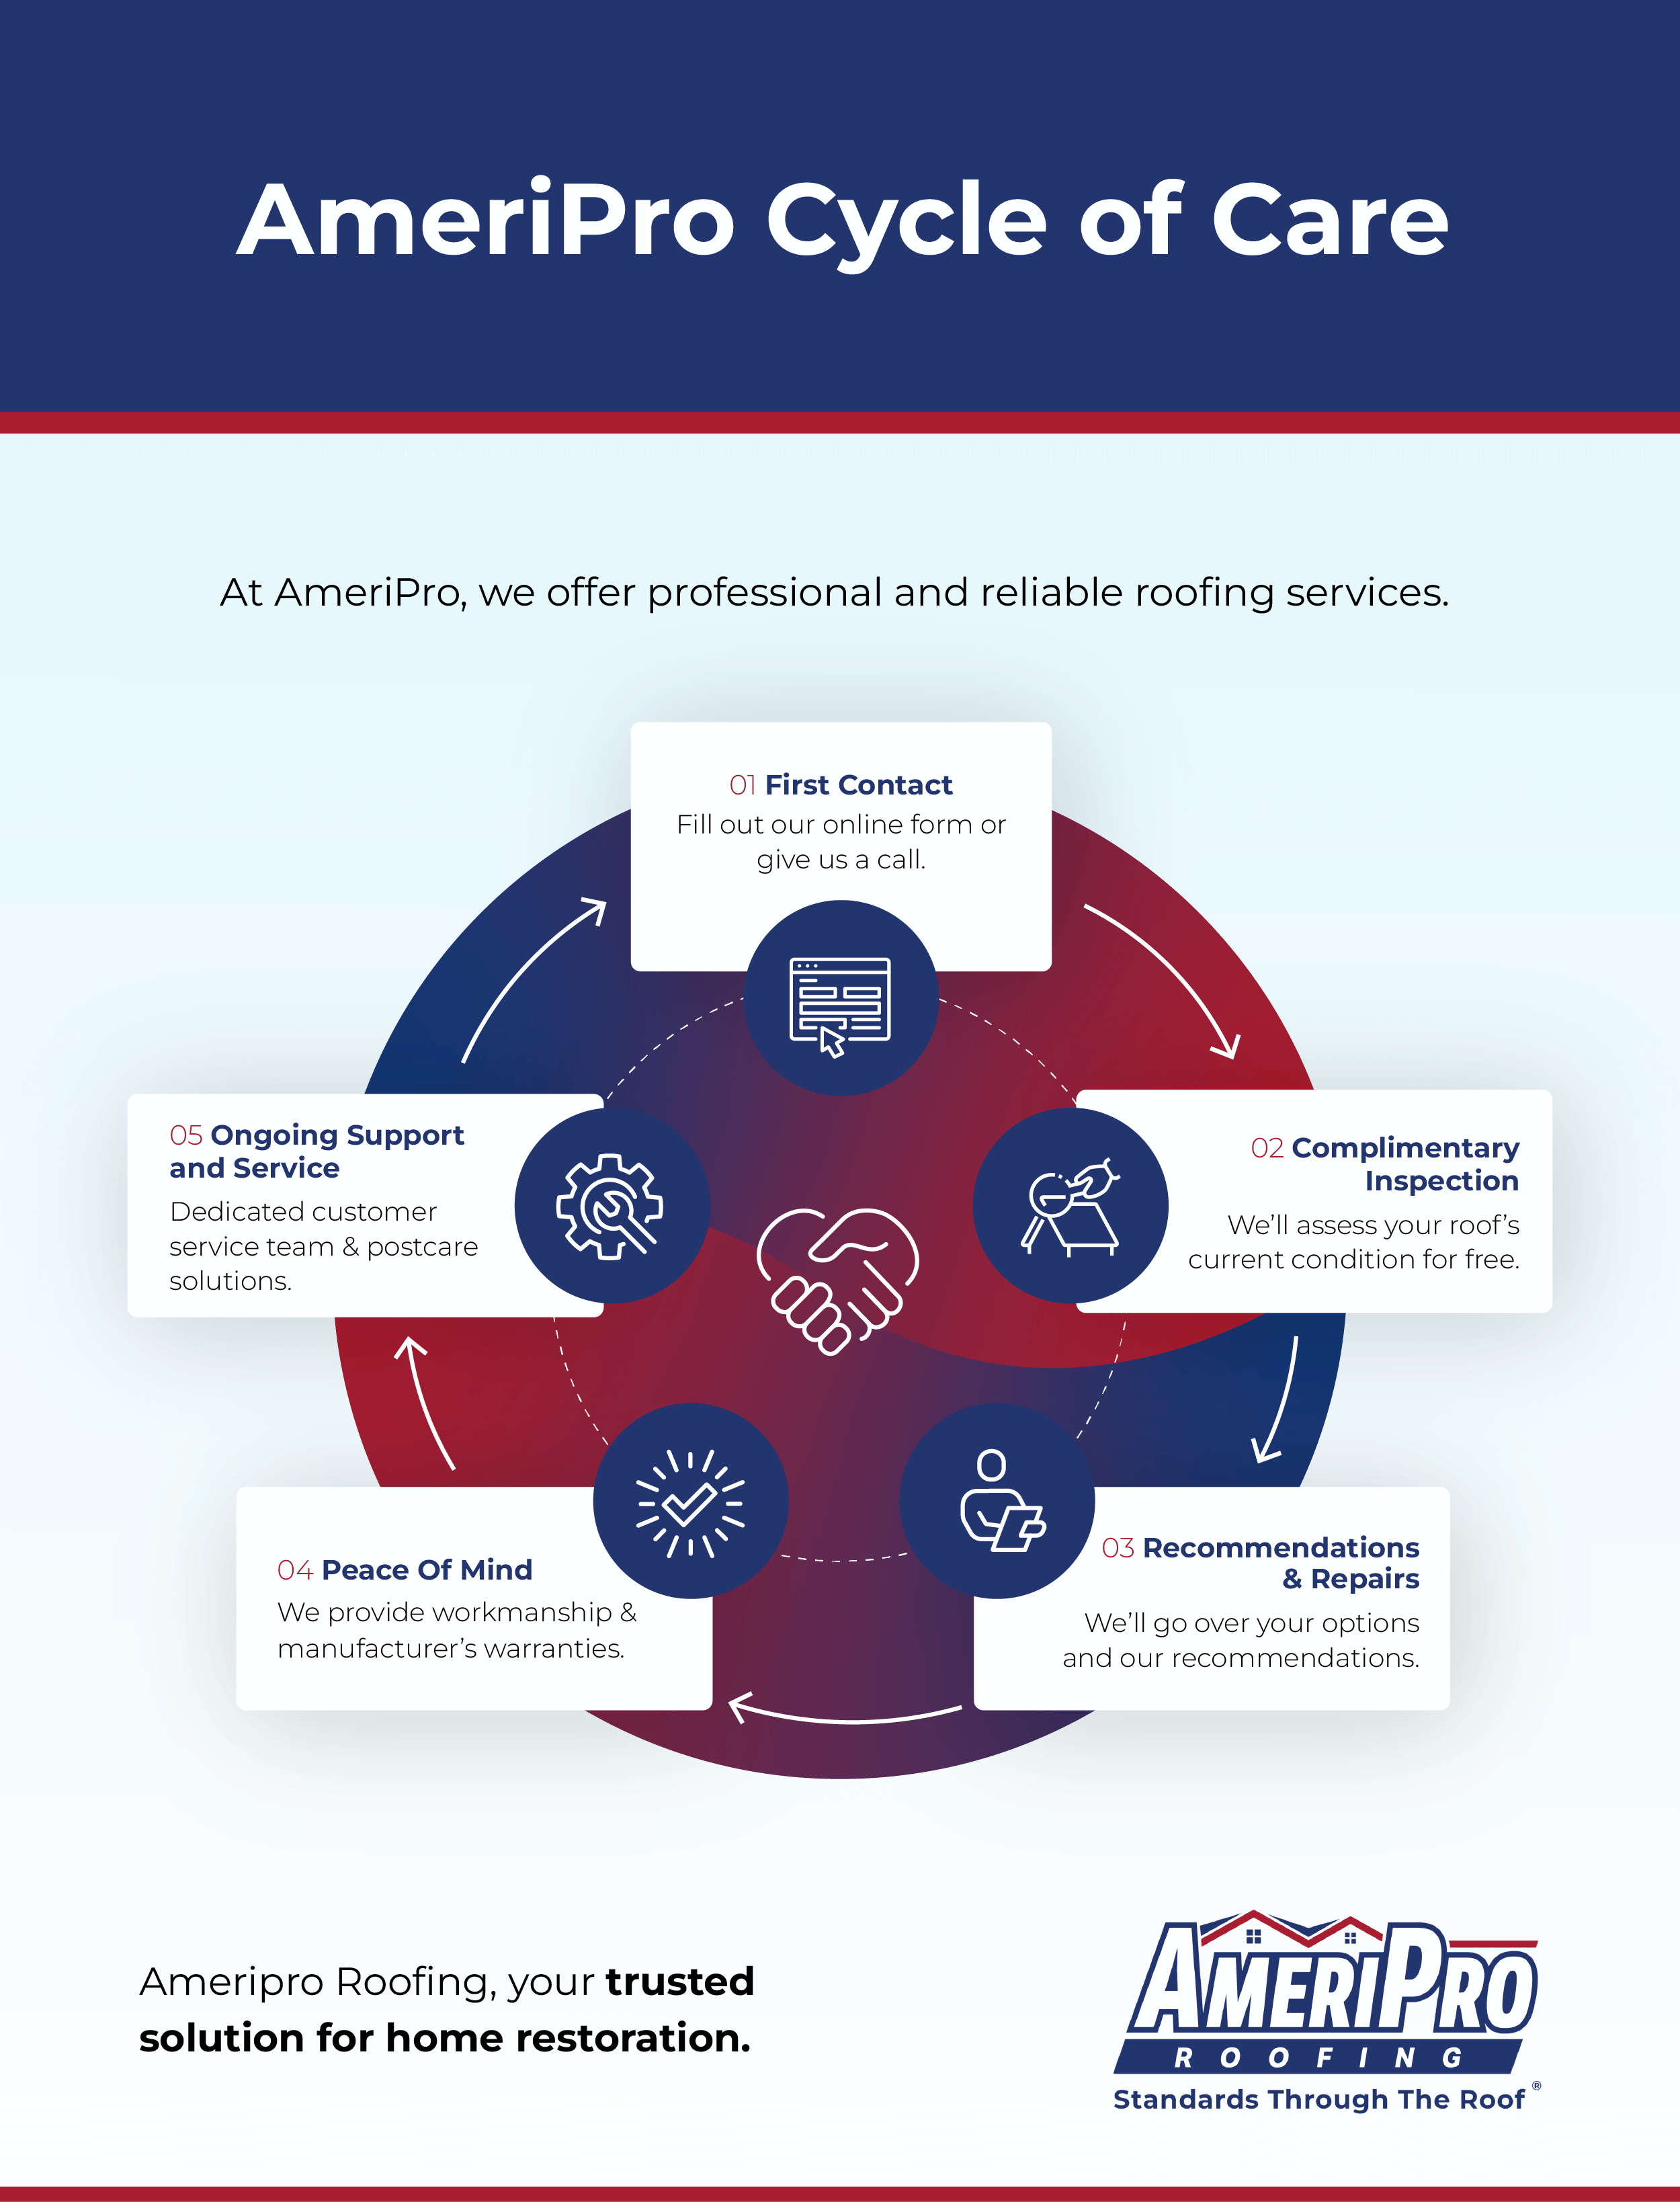 AmeriPro Cycle of Care